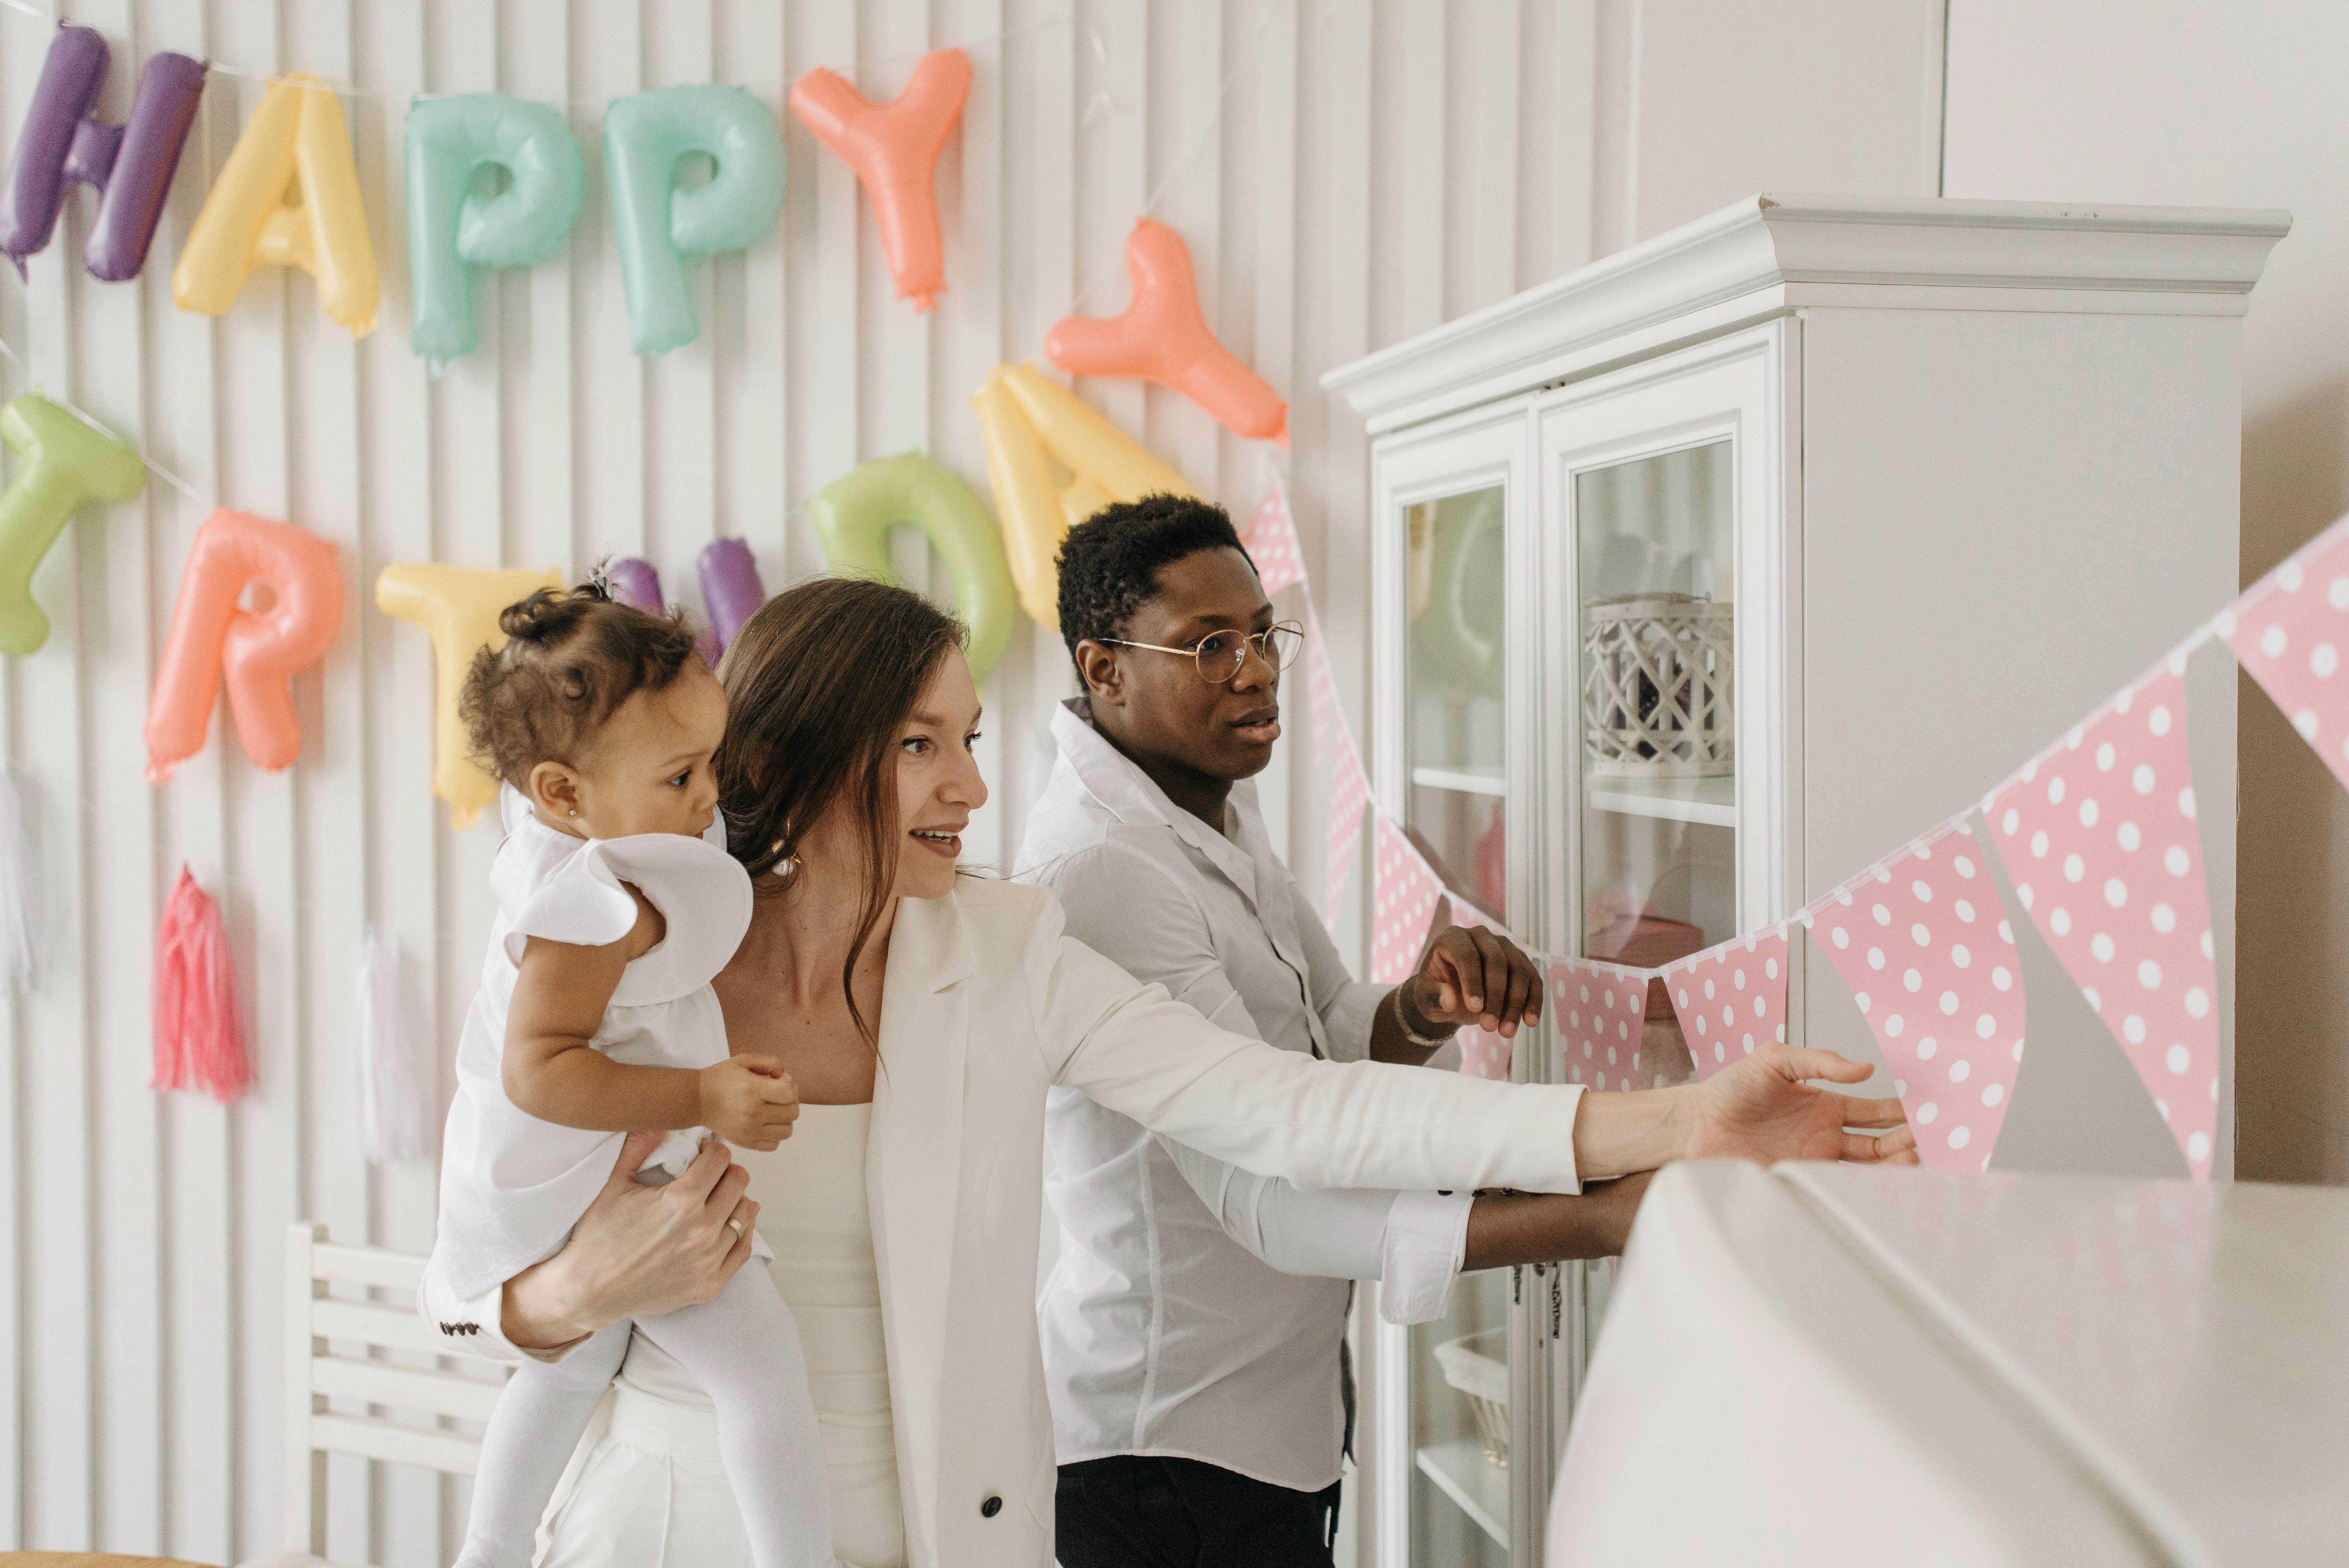 How to decorate my hall creatively on my birthday - Quora